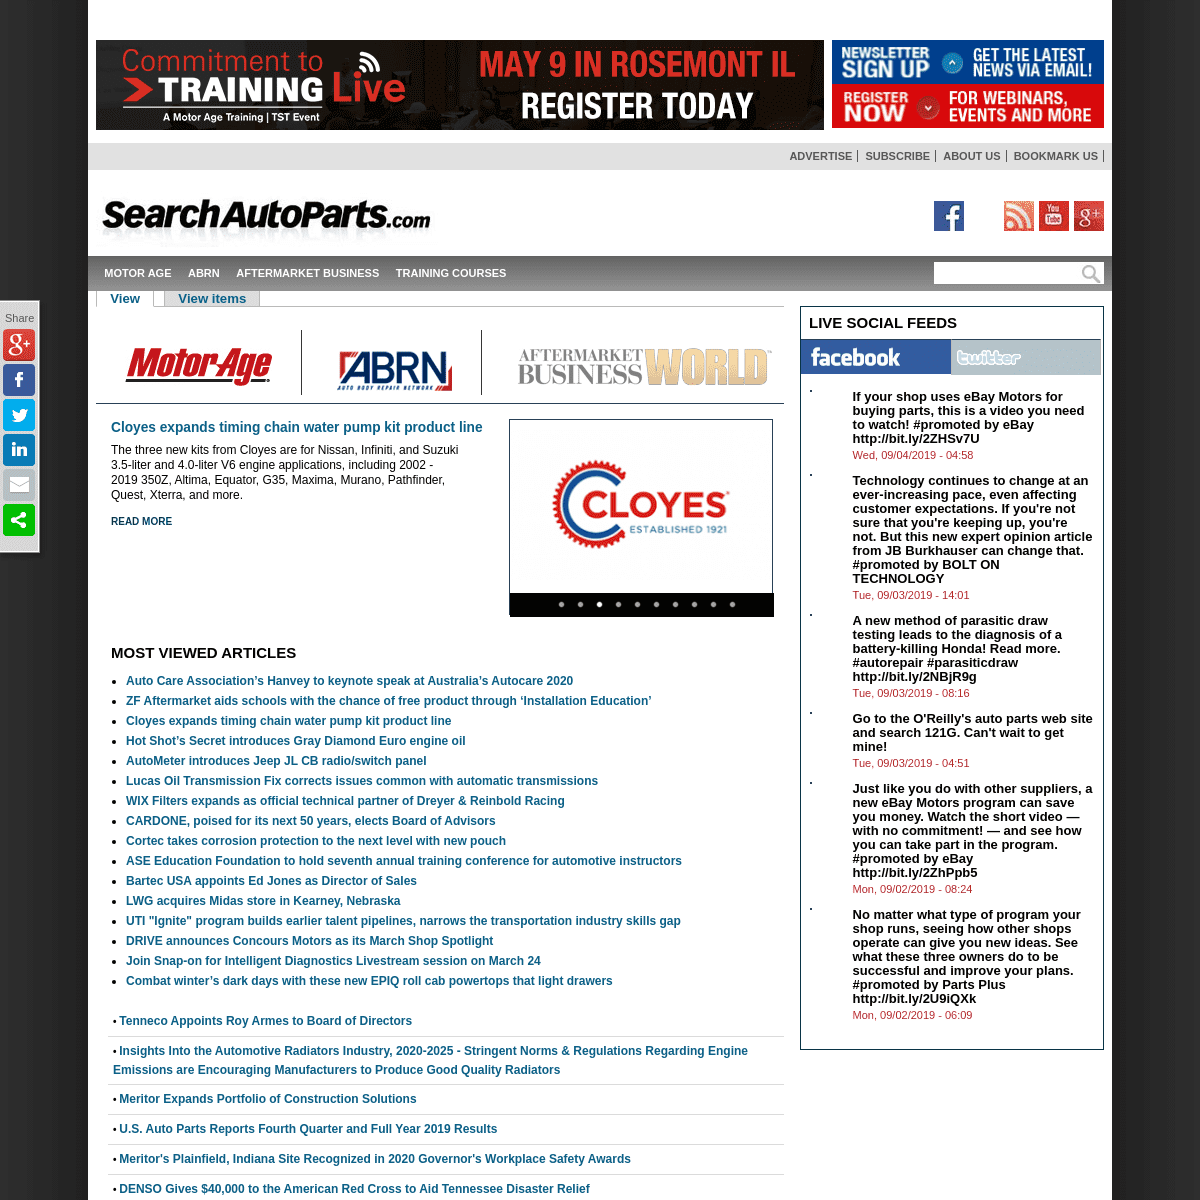 A complete backup of searchautoparts.com